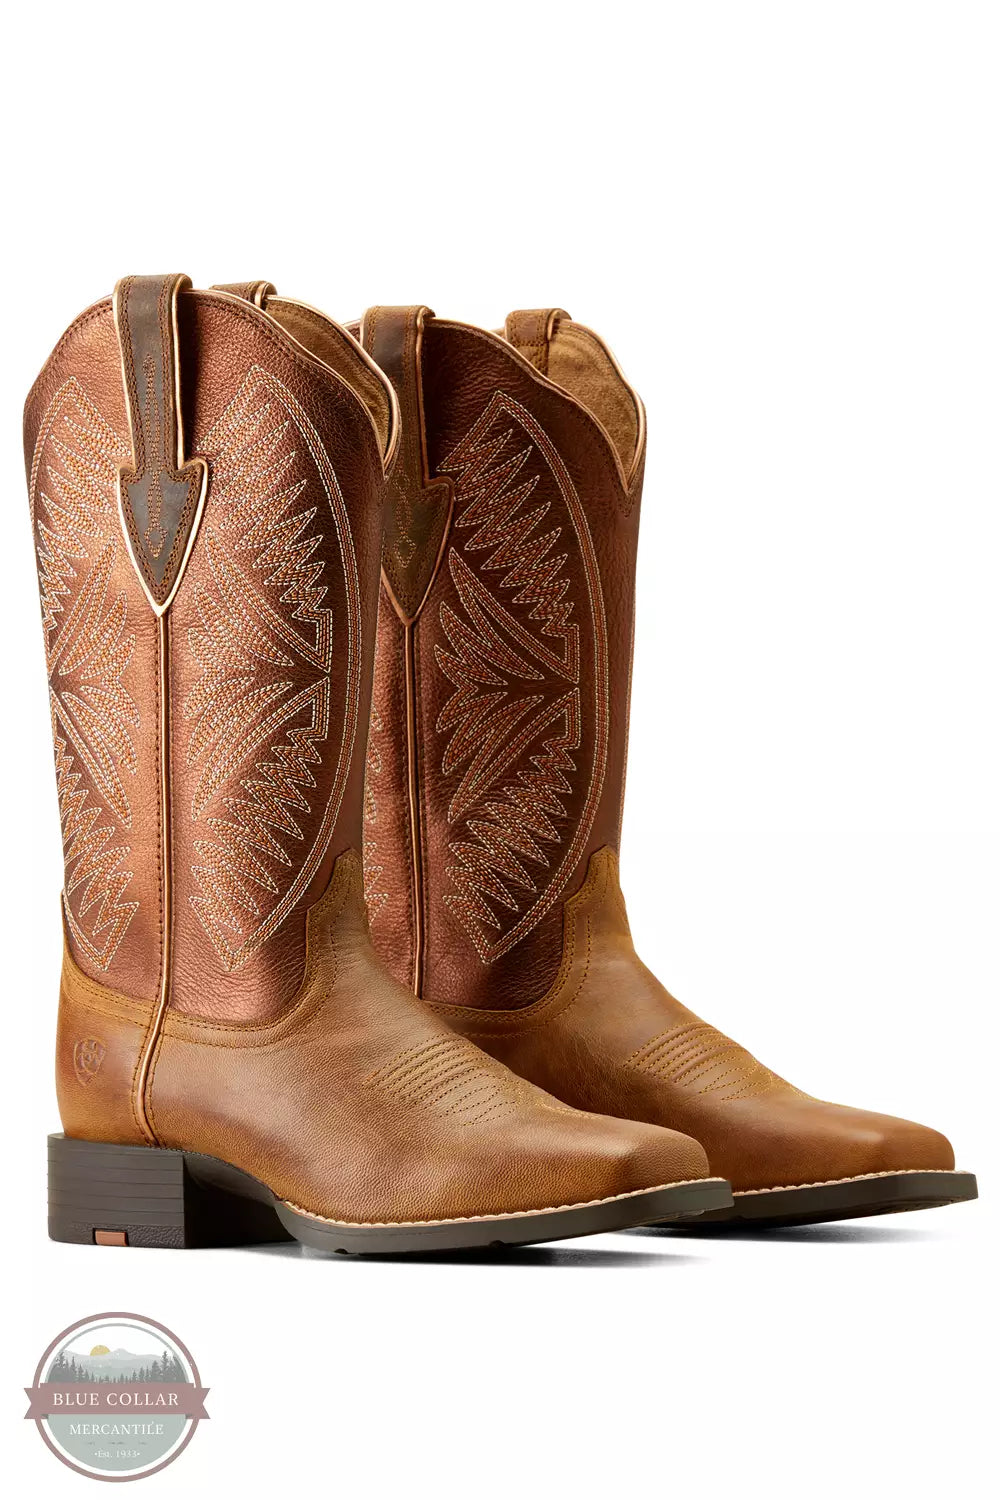 Ariat 10051066 Round Up Ruidoso Western Boot in Pearl / Burnished Chestnut Pair Profile View